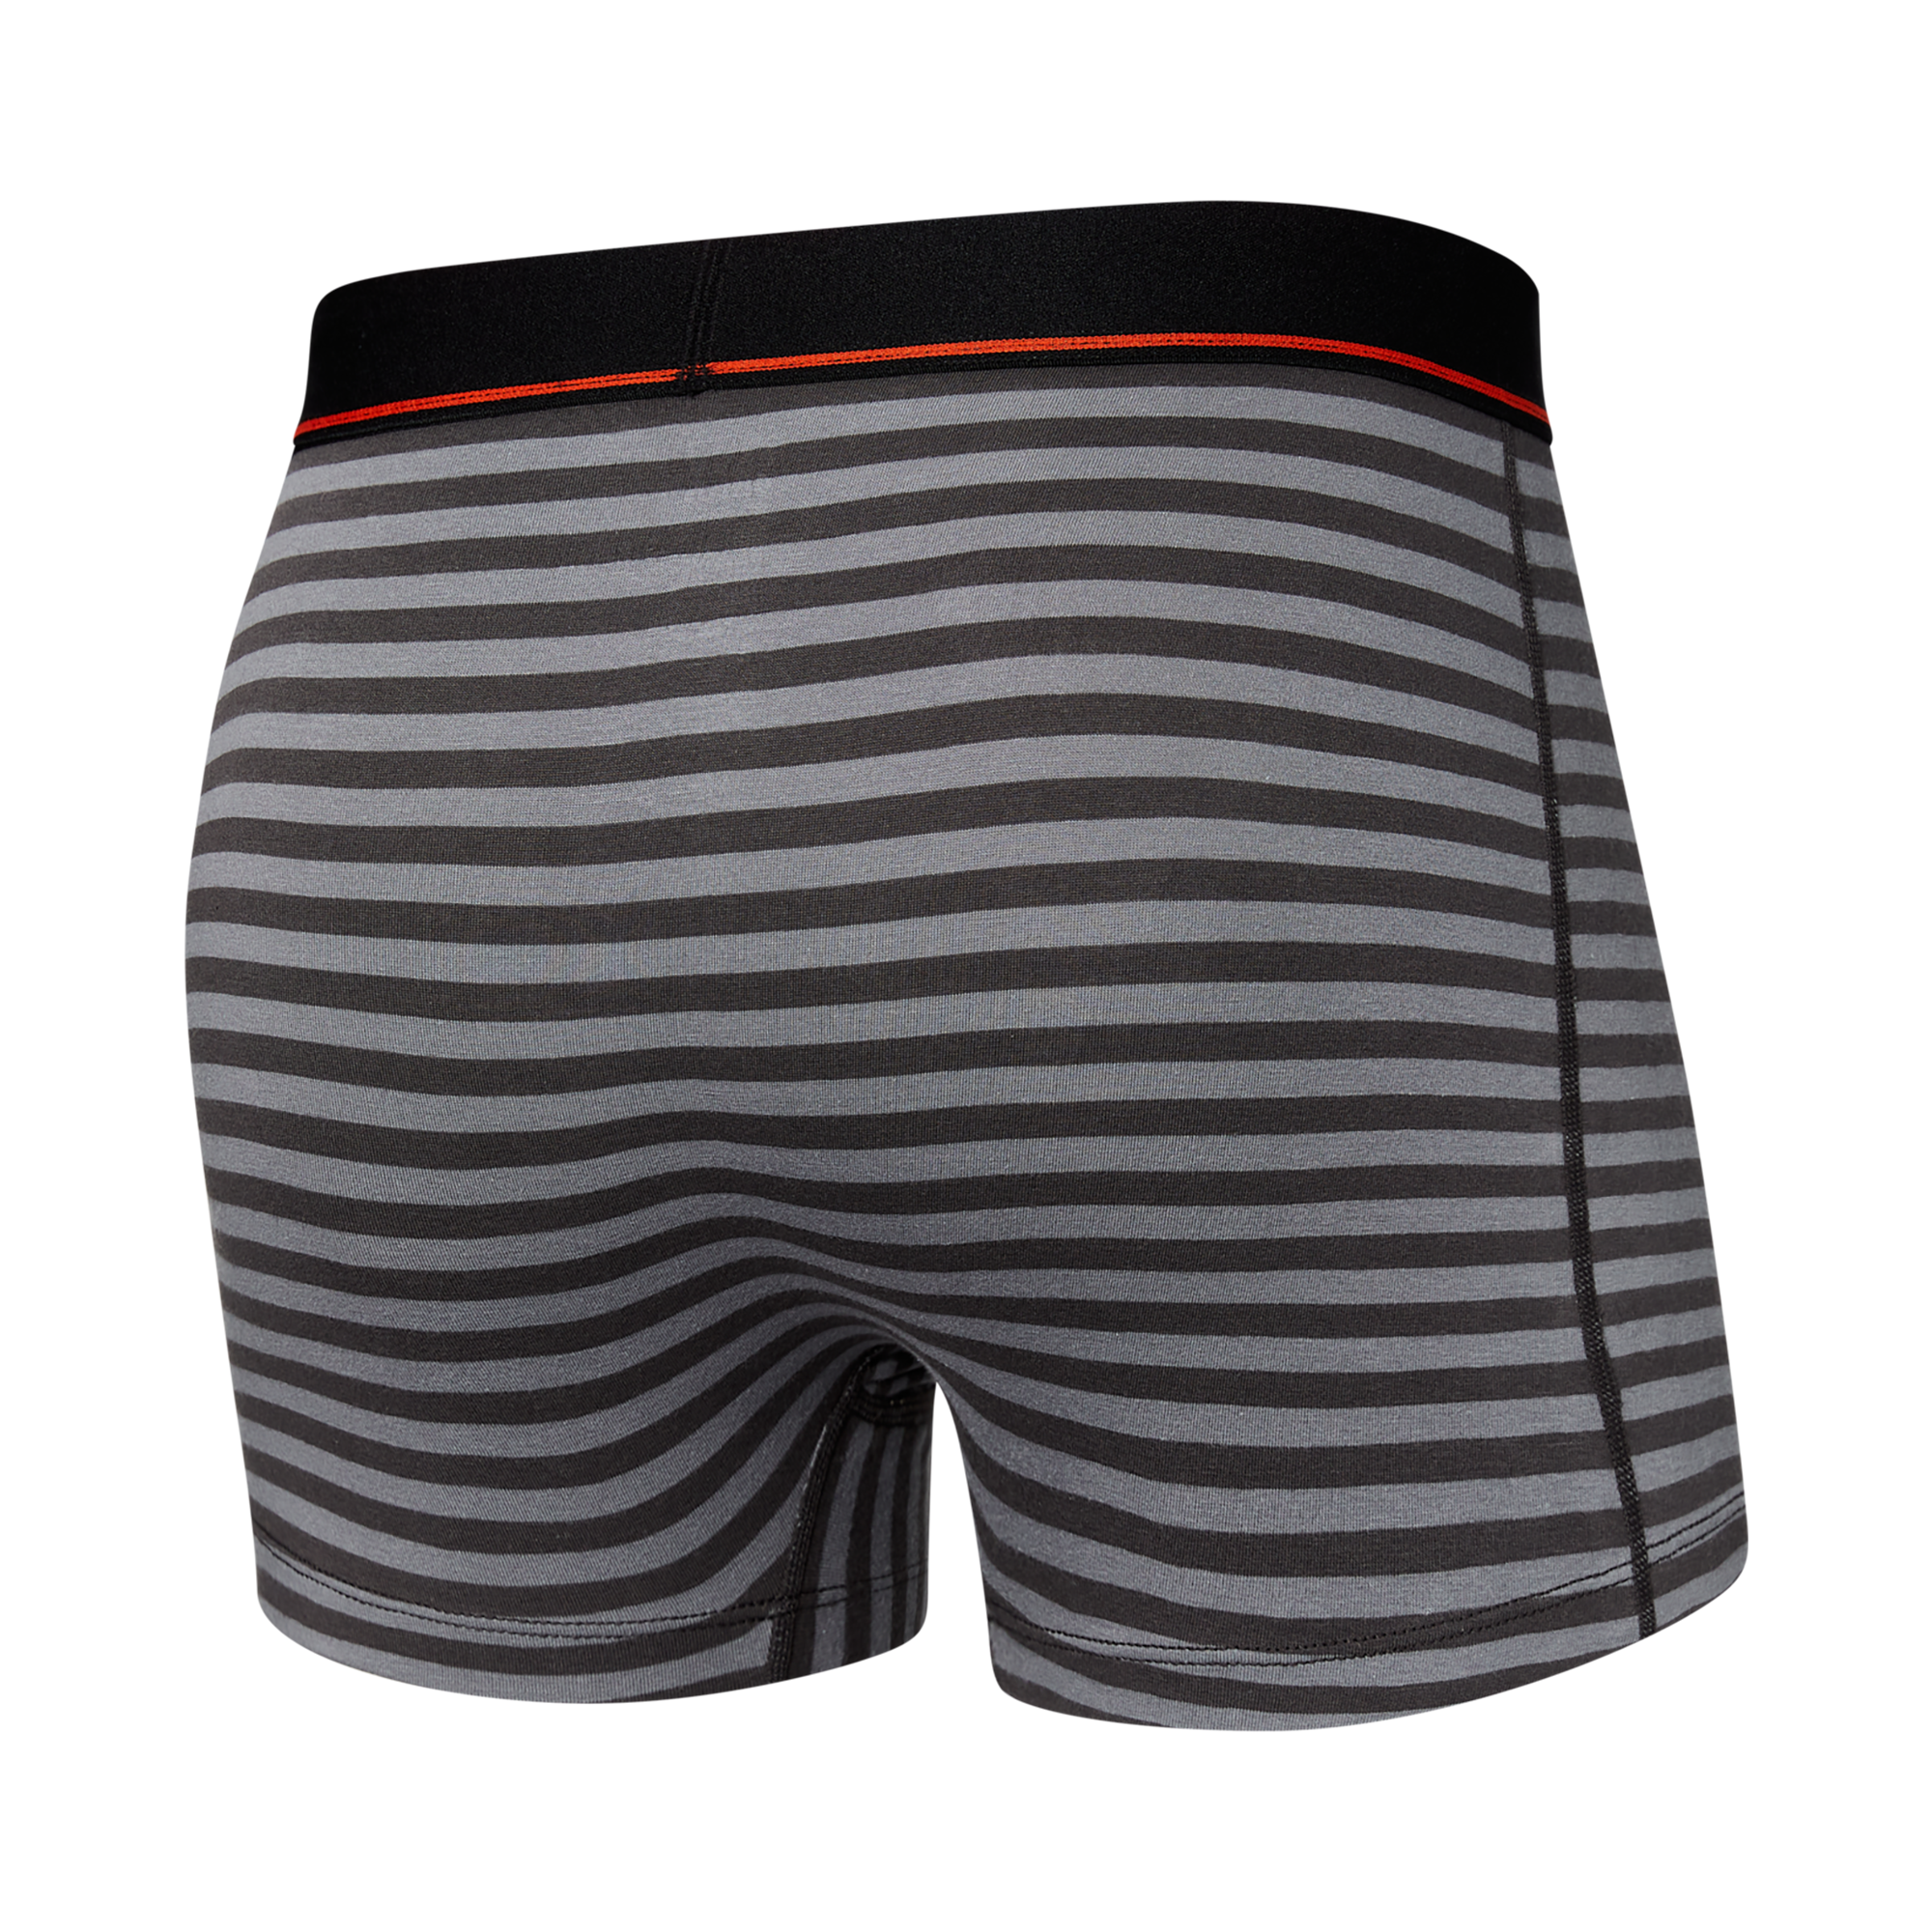 Back of Non-Stop Stretch Cotton Trunk in Hiker Stripe- Grey